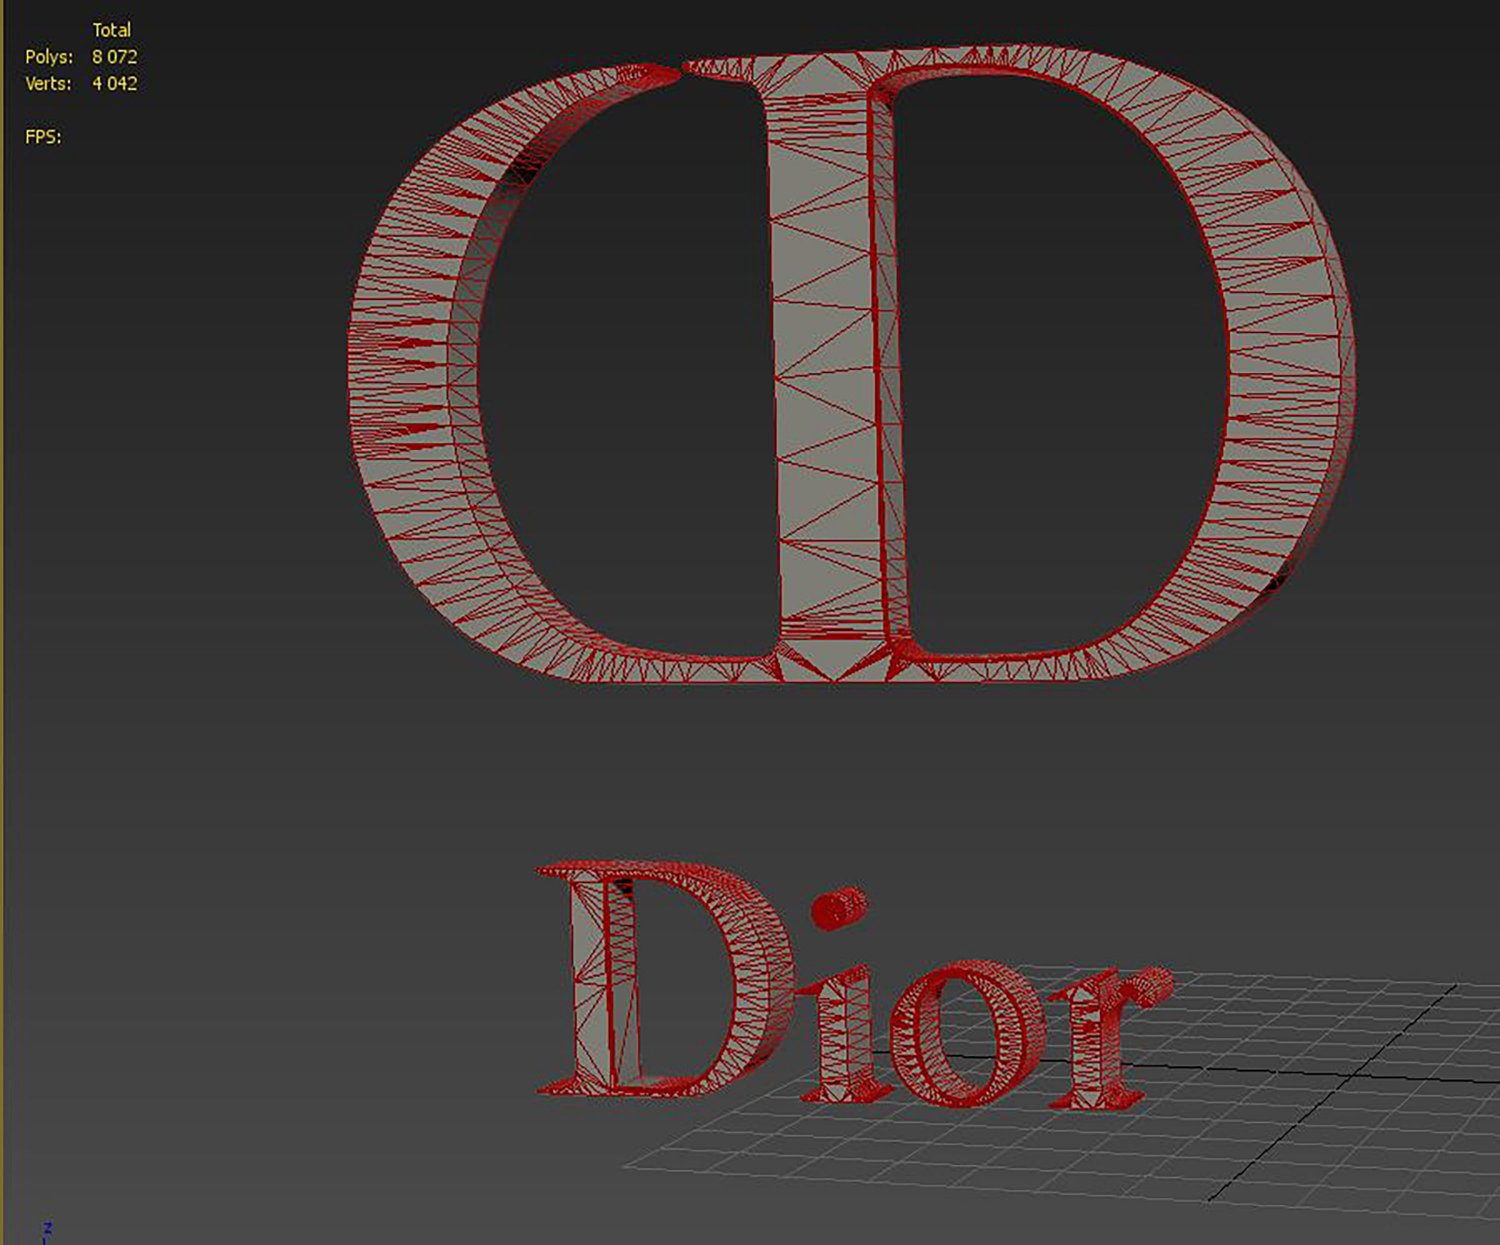 erorded logo dior black cotton jersey with dior and daniel arsham eroded logo  3d print shirt  Trend T Shirt Store Online